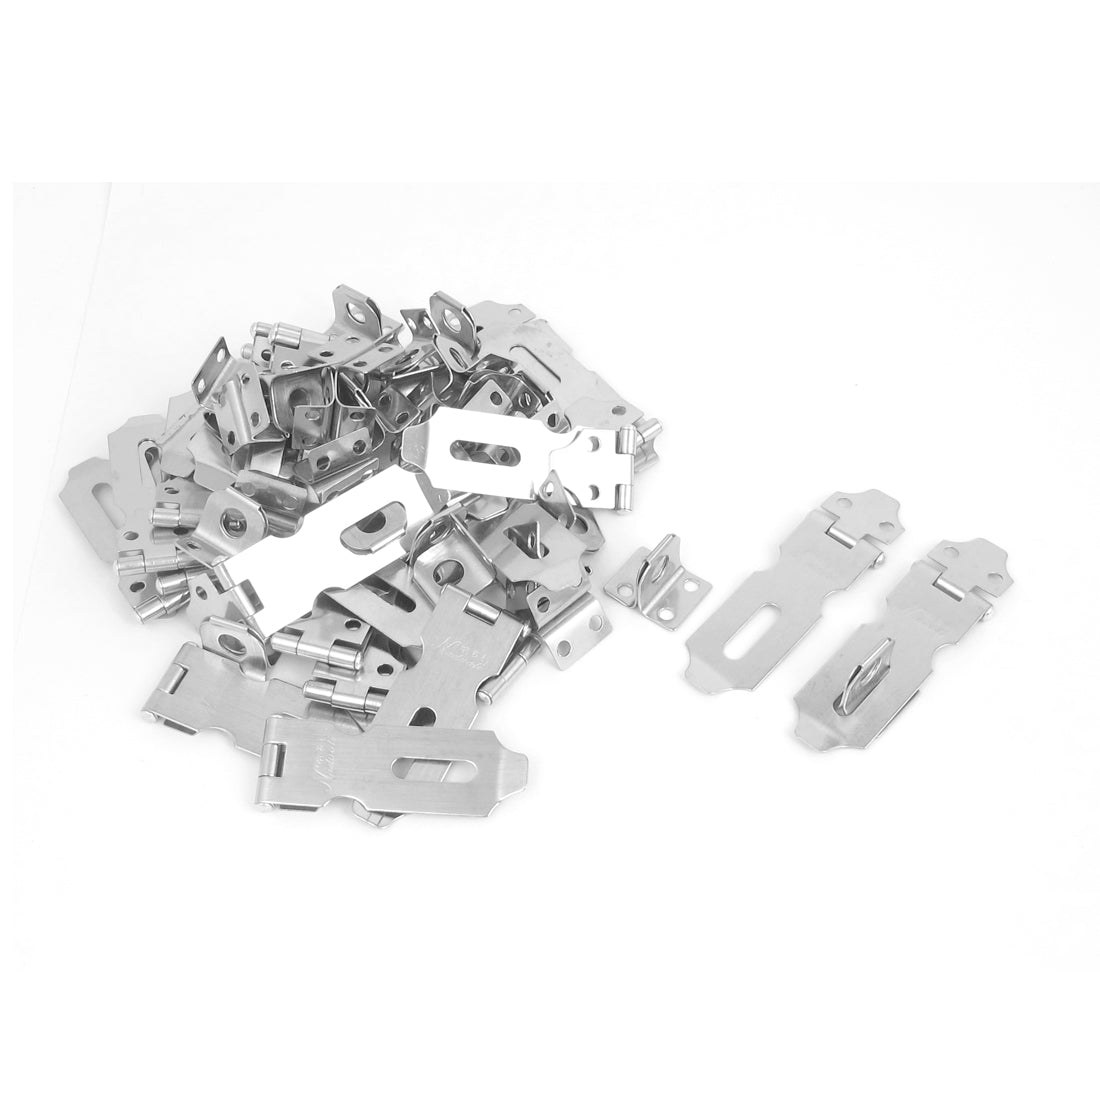 uxcell Uxcell 30pcs Silver Tone Metal Safety Gate Cabinet Clasp Lock Locking Padlock Latch Hasp Staple